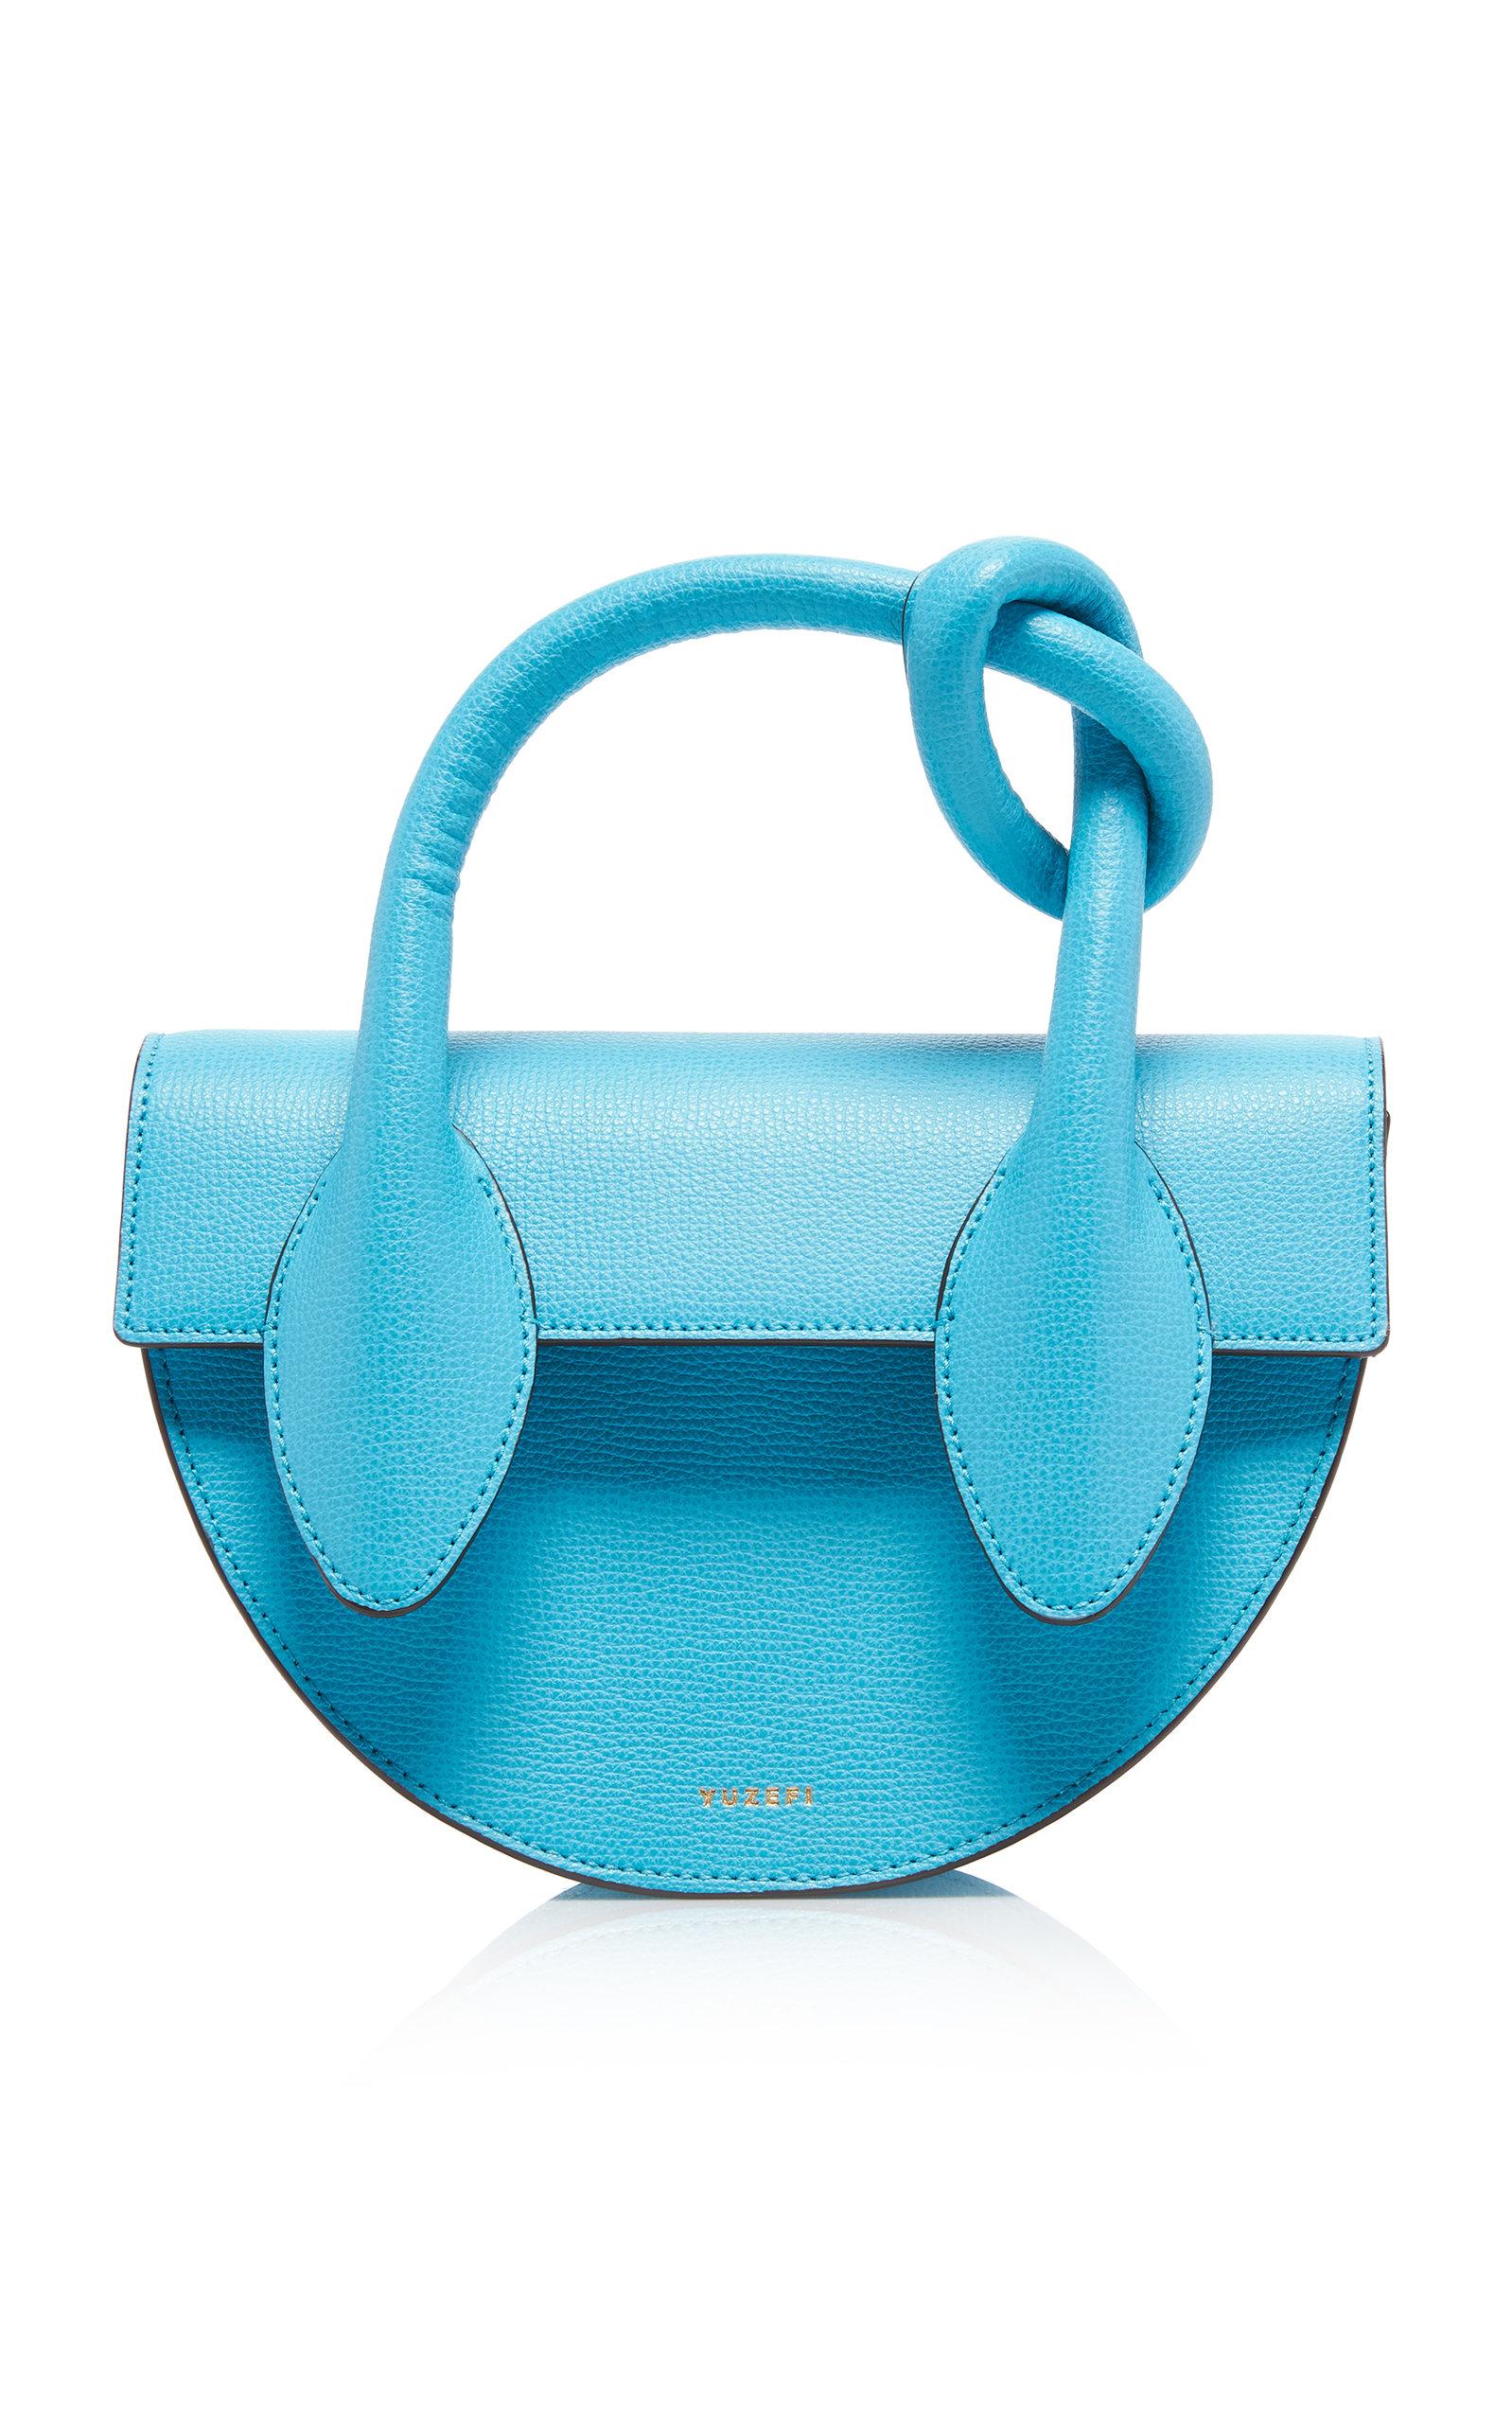 Yuzefi Dolores Leather Bag in Blue | Lyst